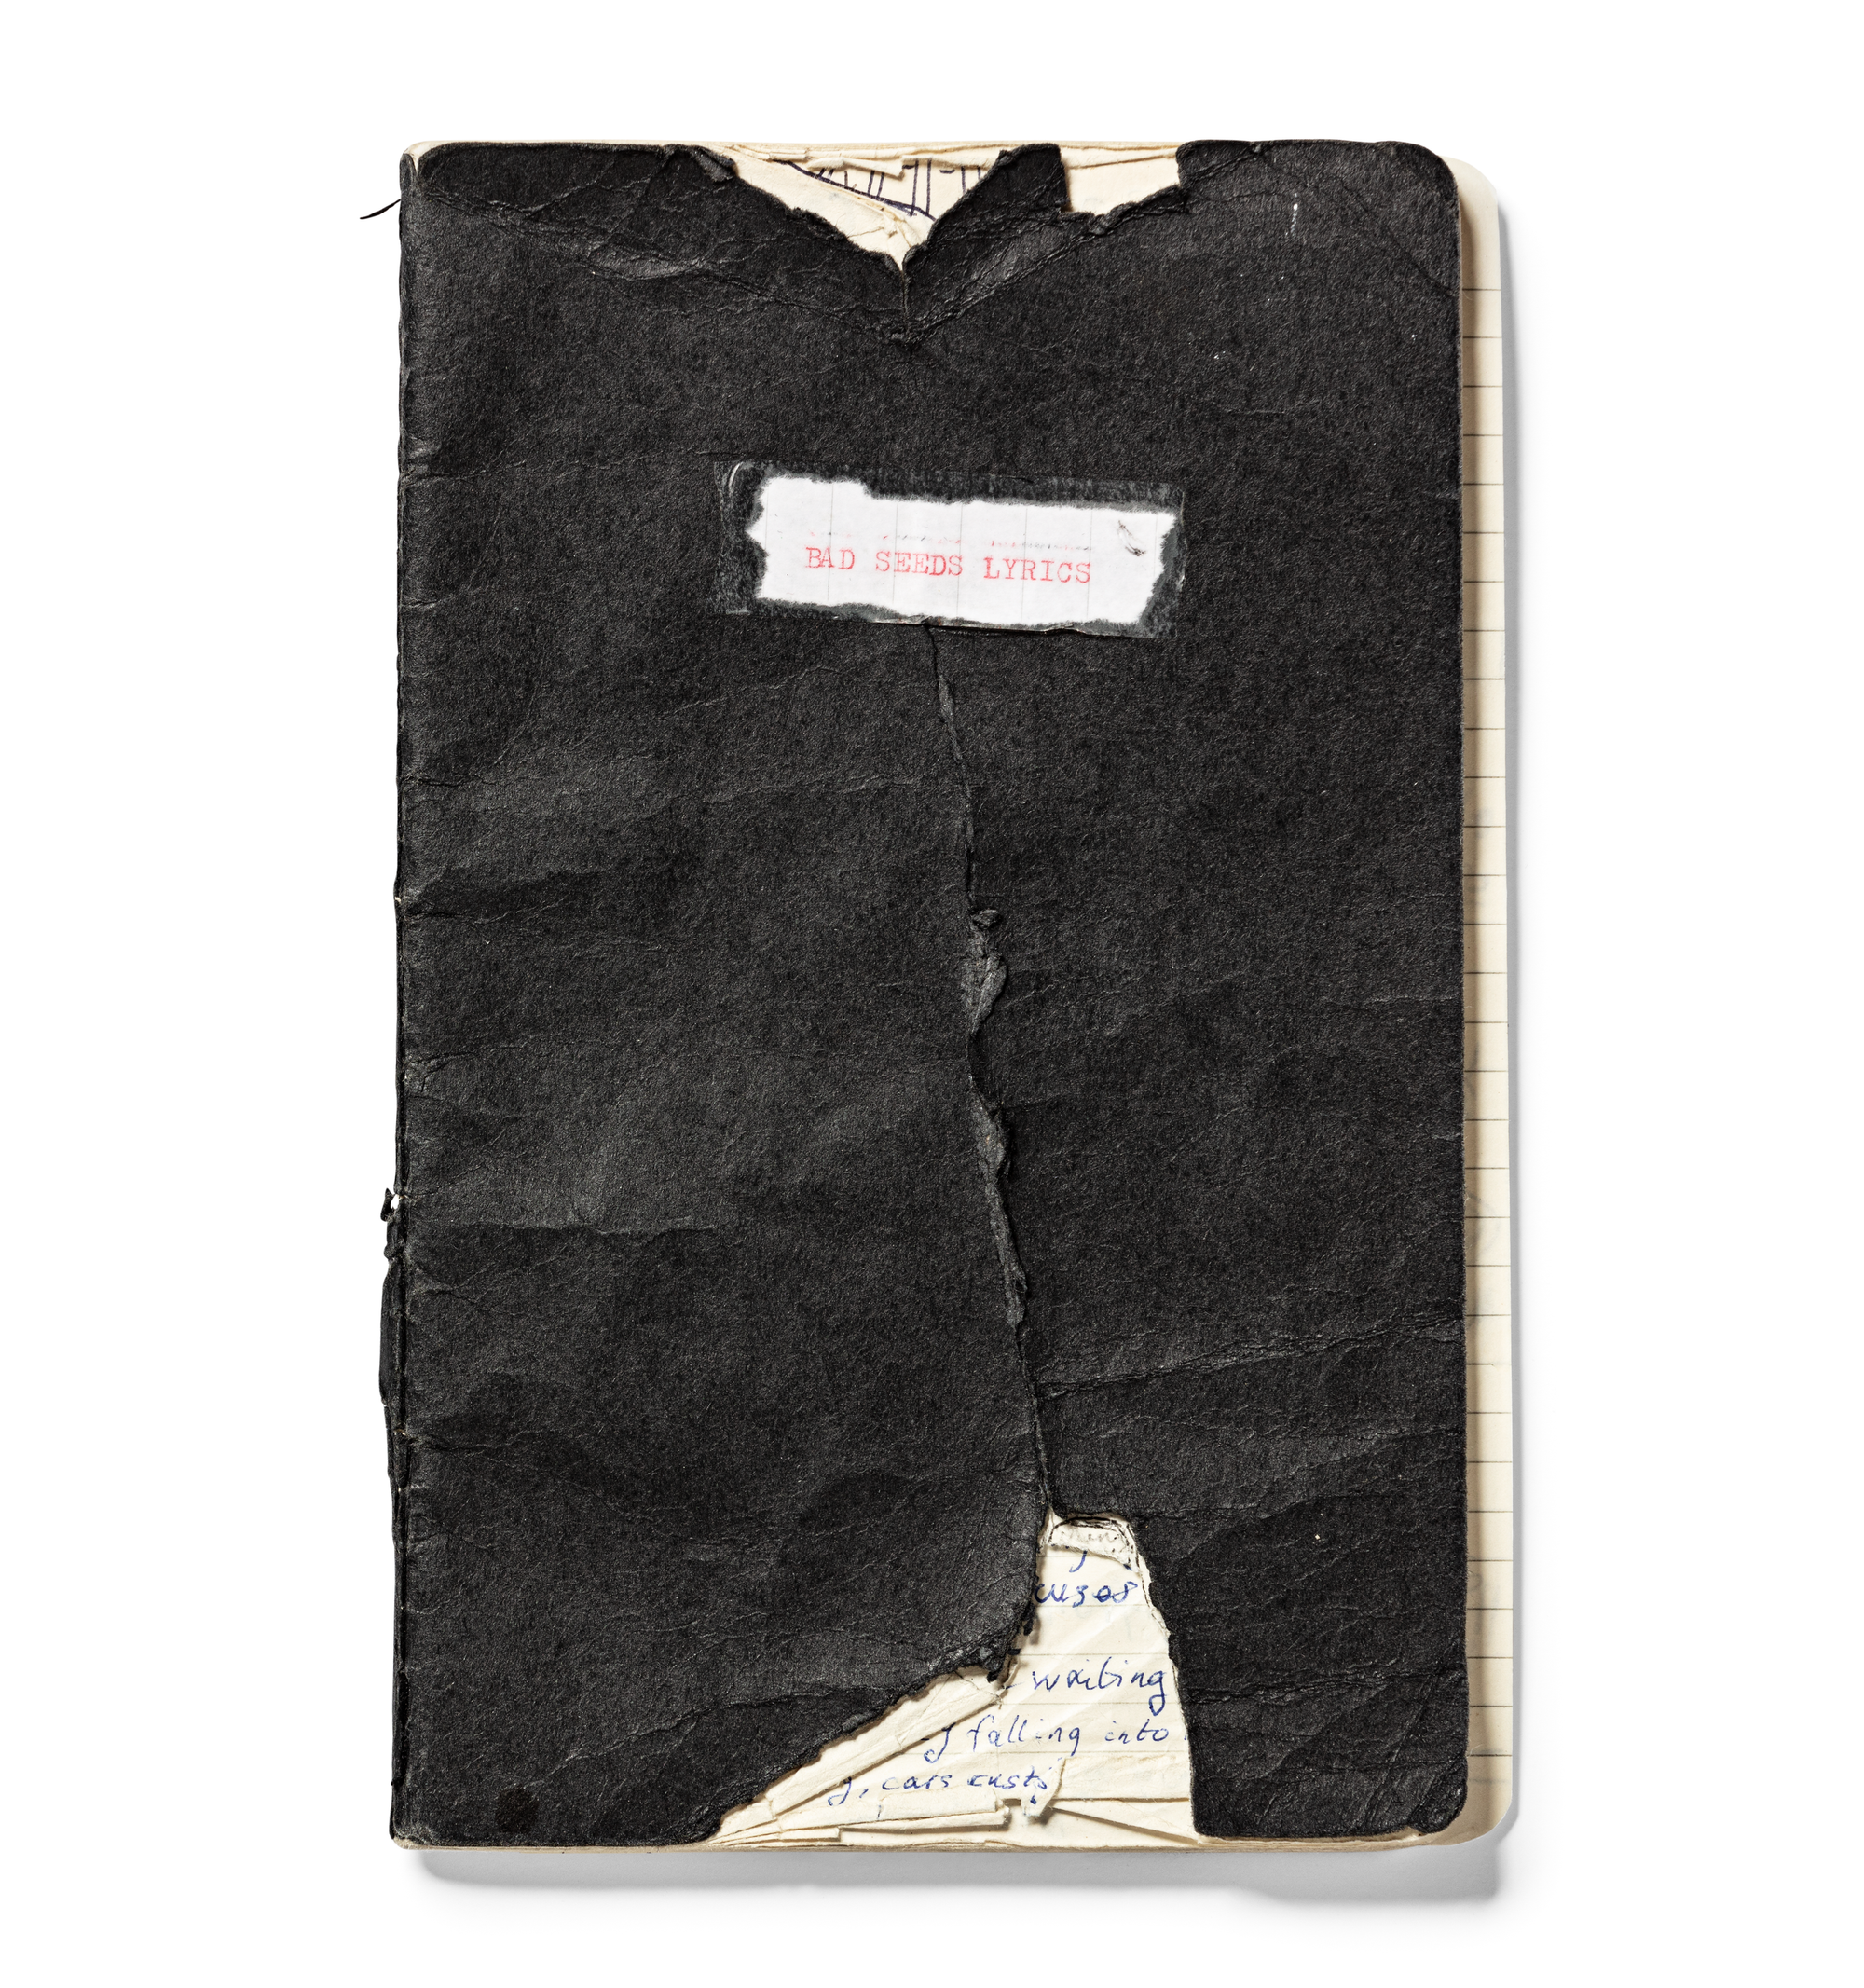 Tattered black notebook with "Bad Seeds Lyrics" in pink font on the cover